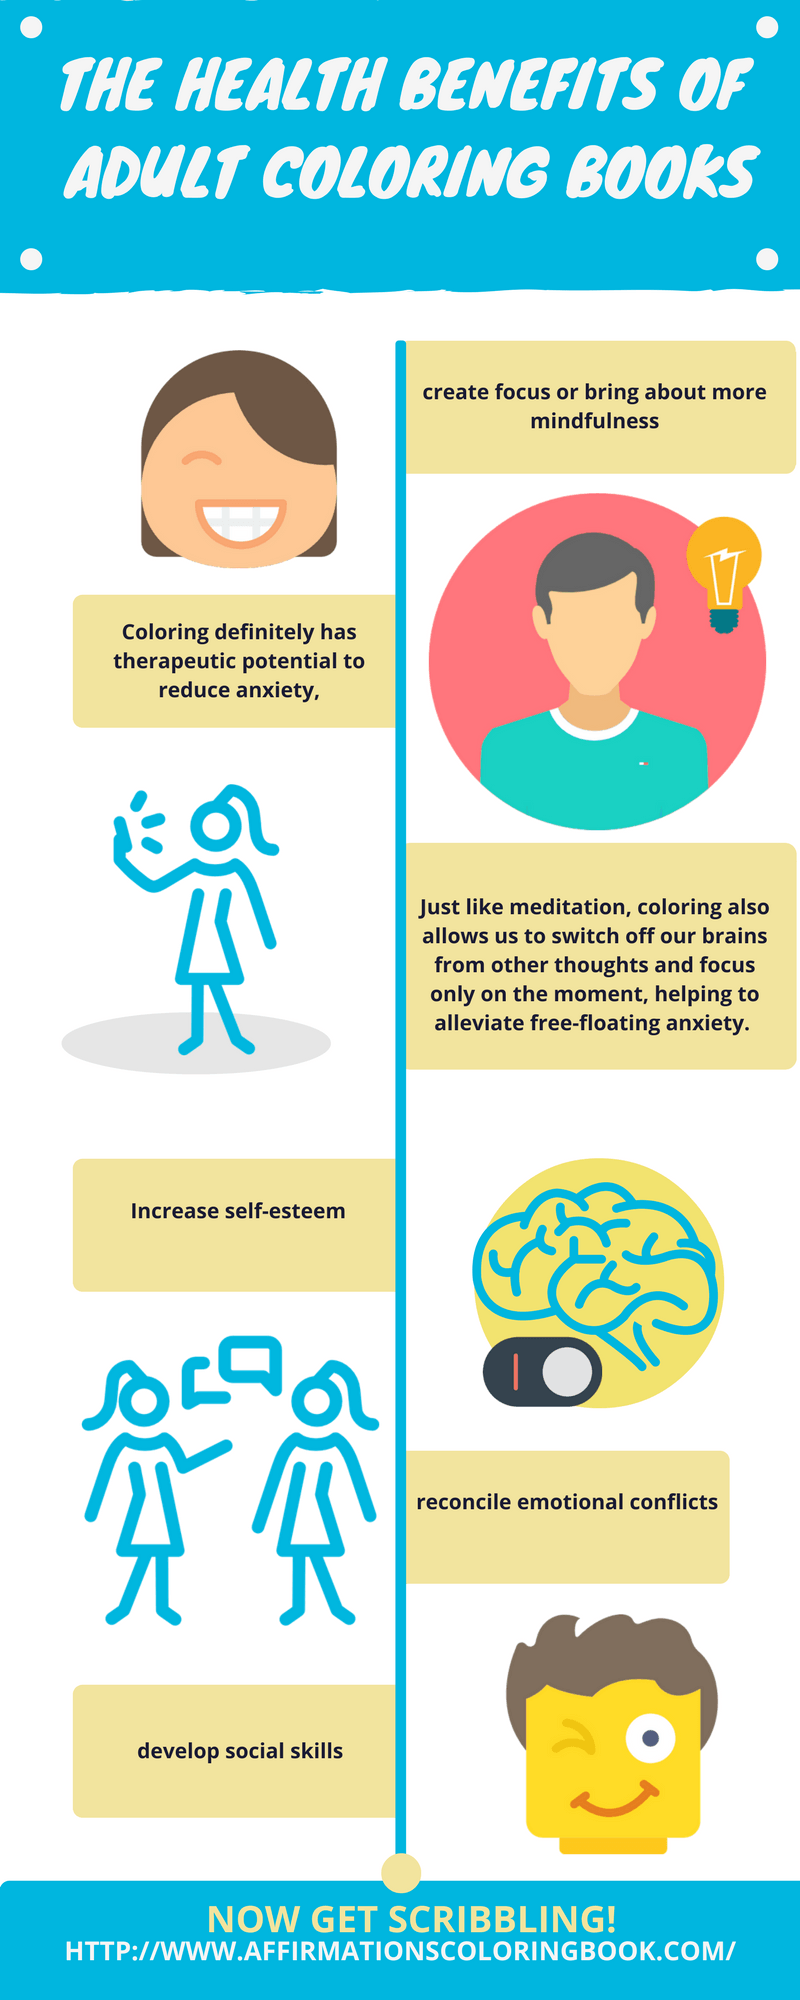 The Health Benefits of Adult Coloring Books Infographic ...